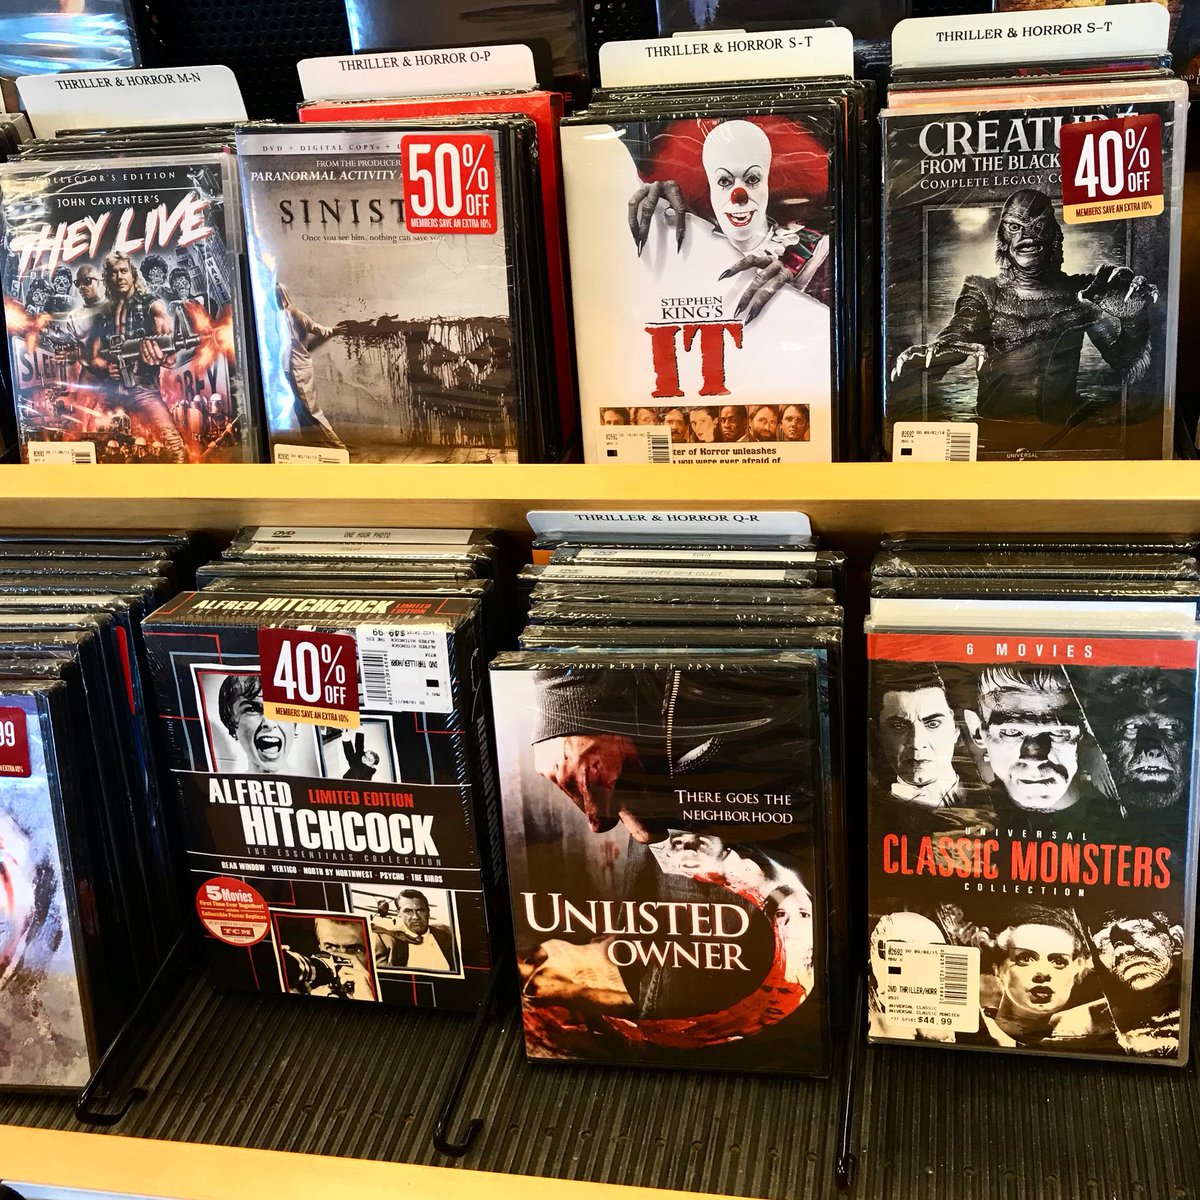 So honored to be on a shelf this October! @BN_evansvilleIN @MrJed_Brian @PromoteHorror  #horrormovies #halloween #theylive #UnlistedOwner